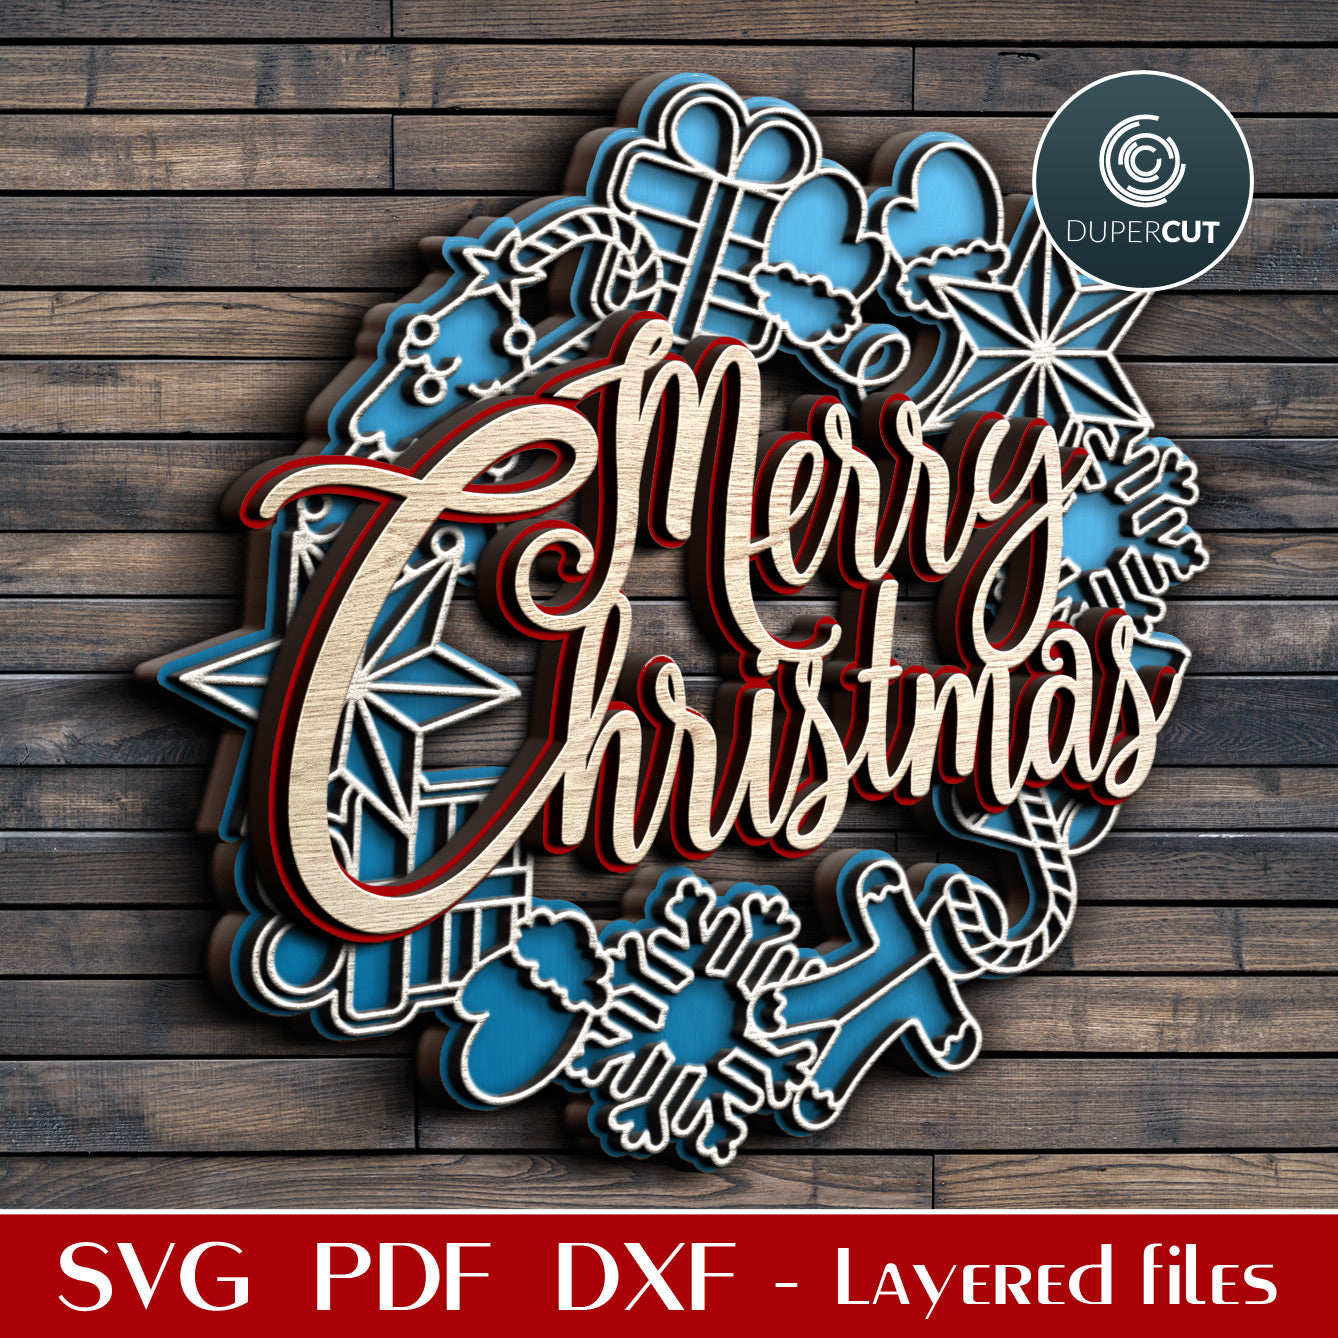 Merry Christmas DIY door hanger sign - SVG PDF DXF layered files for laser and digital cutting machines - Glowforge, Cricut, Silhouette, CNC plasma by DuperCut